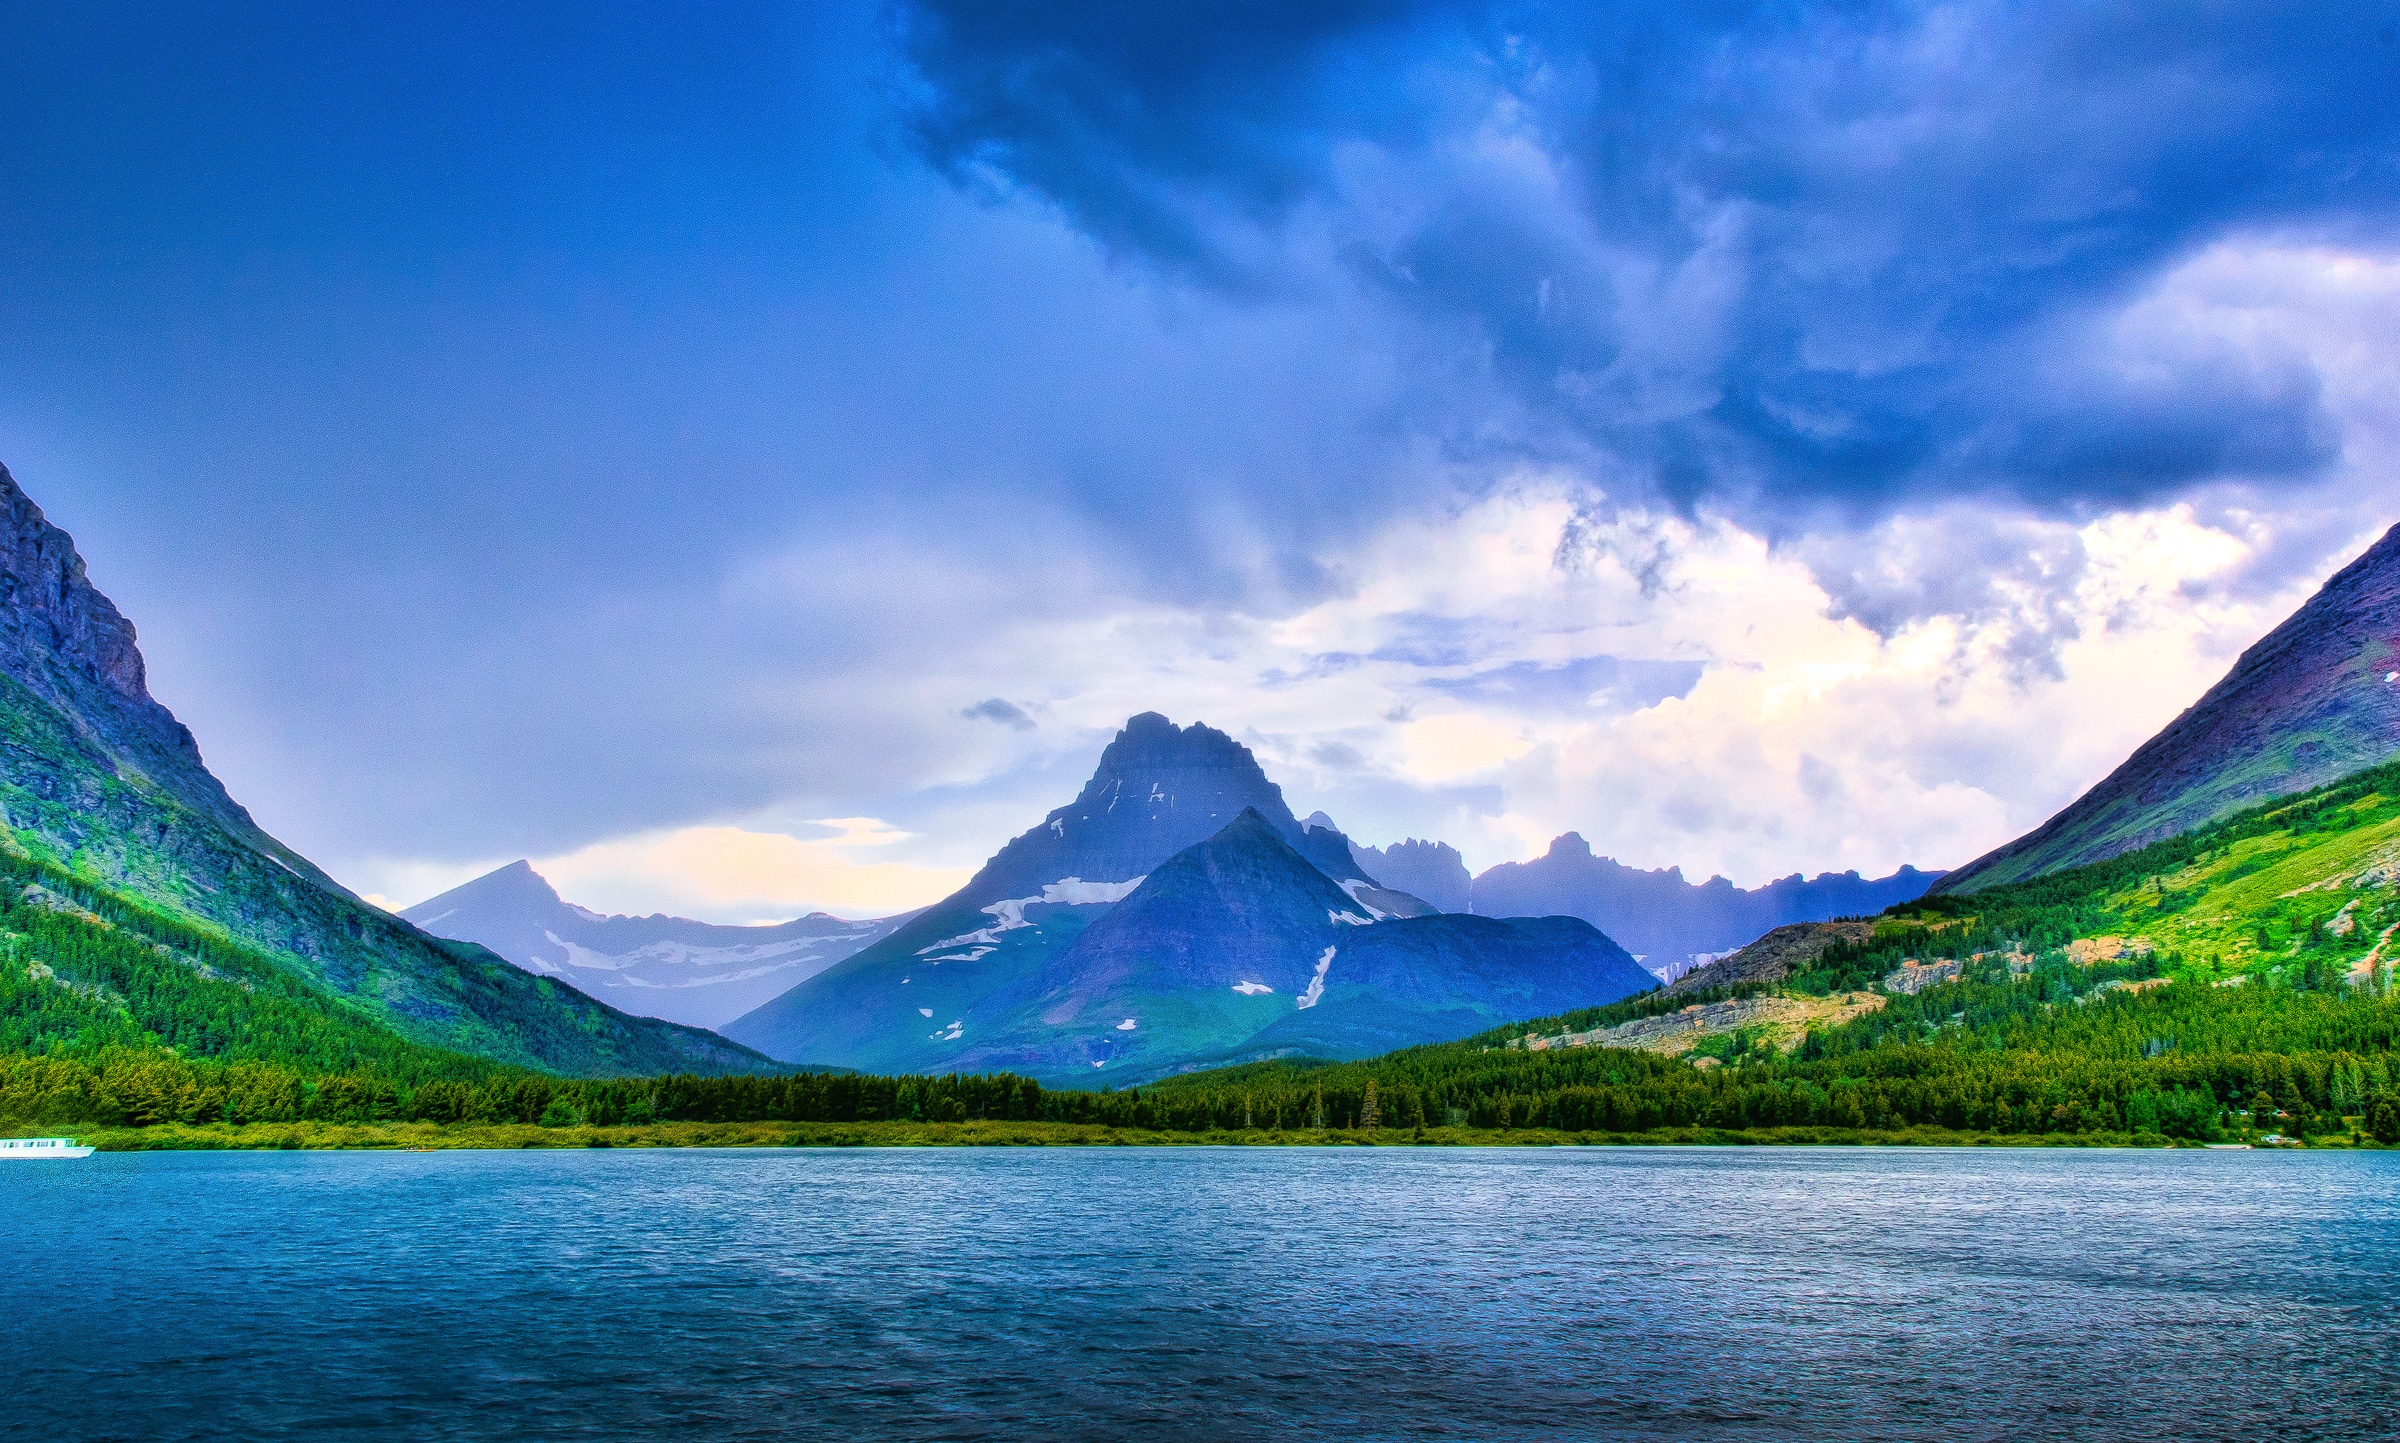 This view across Swiftcurrent Lake really shows the effects of the most recent glaciation - the classic u-shaped valley. Glacier National Park, Montana.